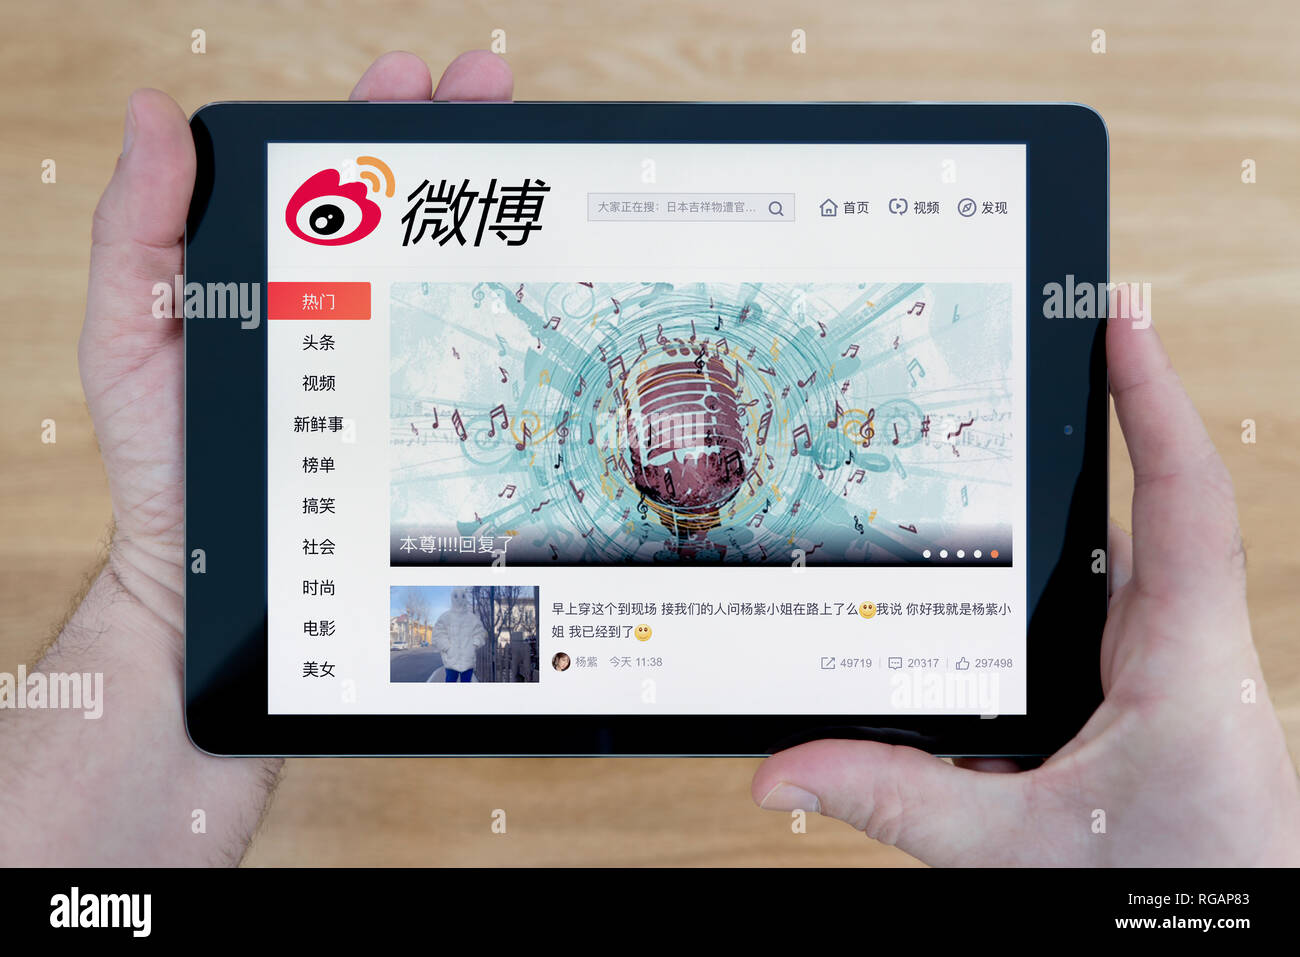 A man looks at the Weibo website on his iPad tablet device, shot against a wooden table top background (Editorial use only) Stock Photo